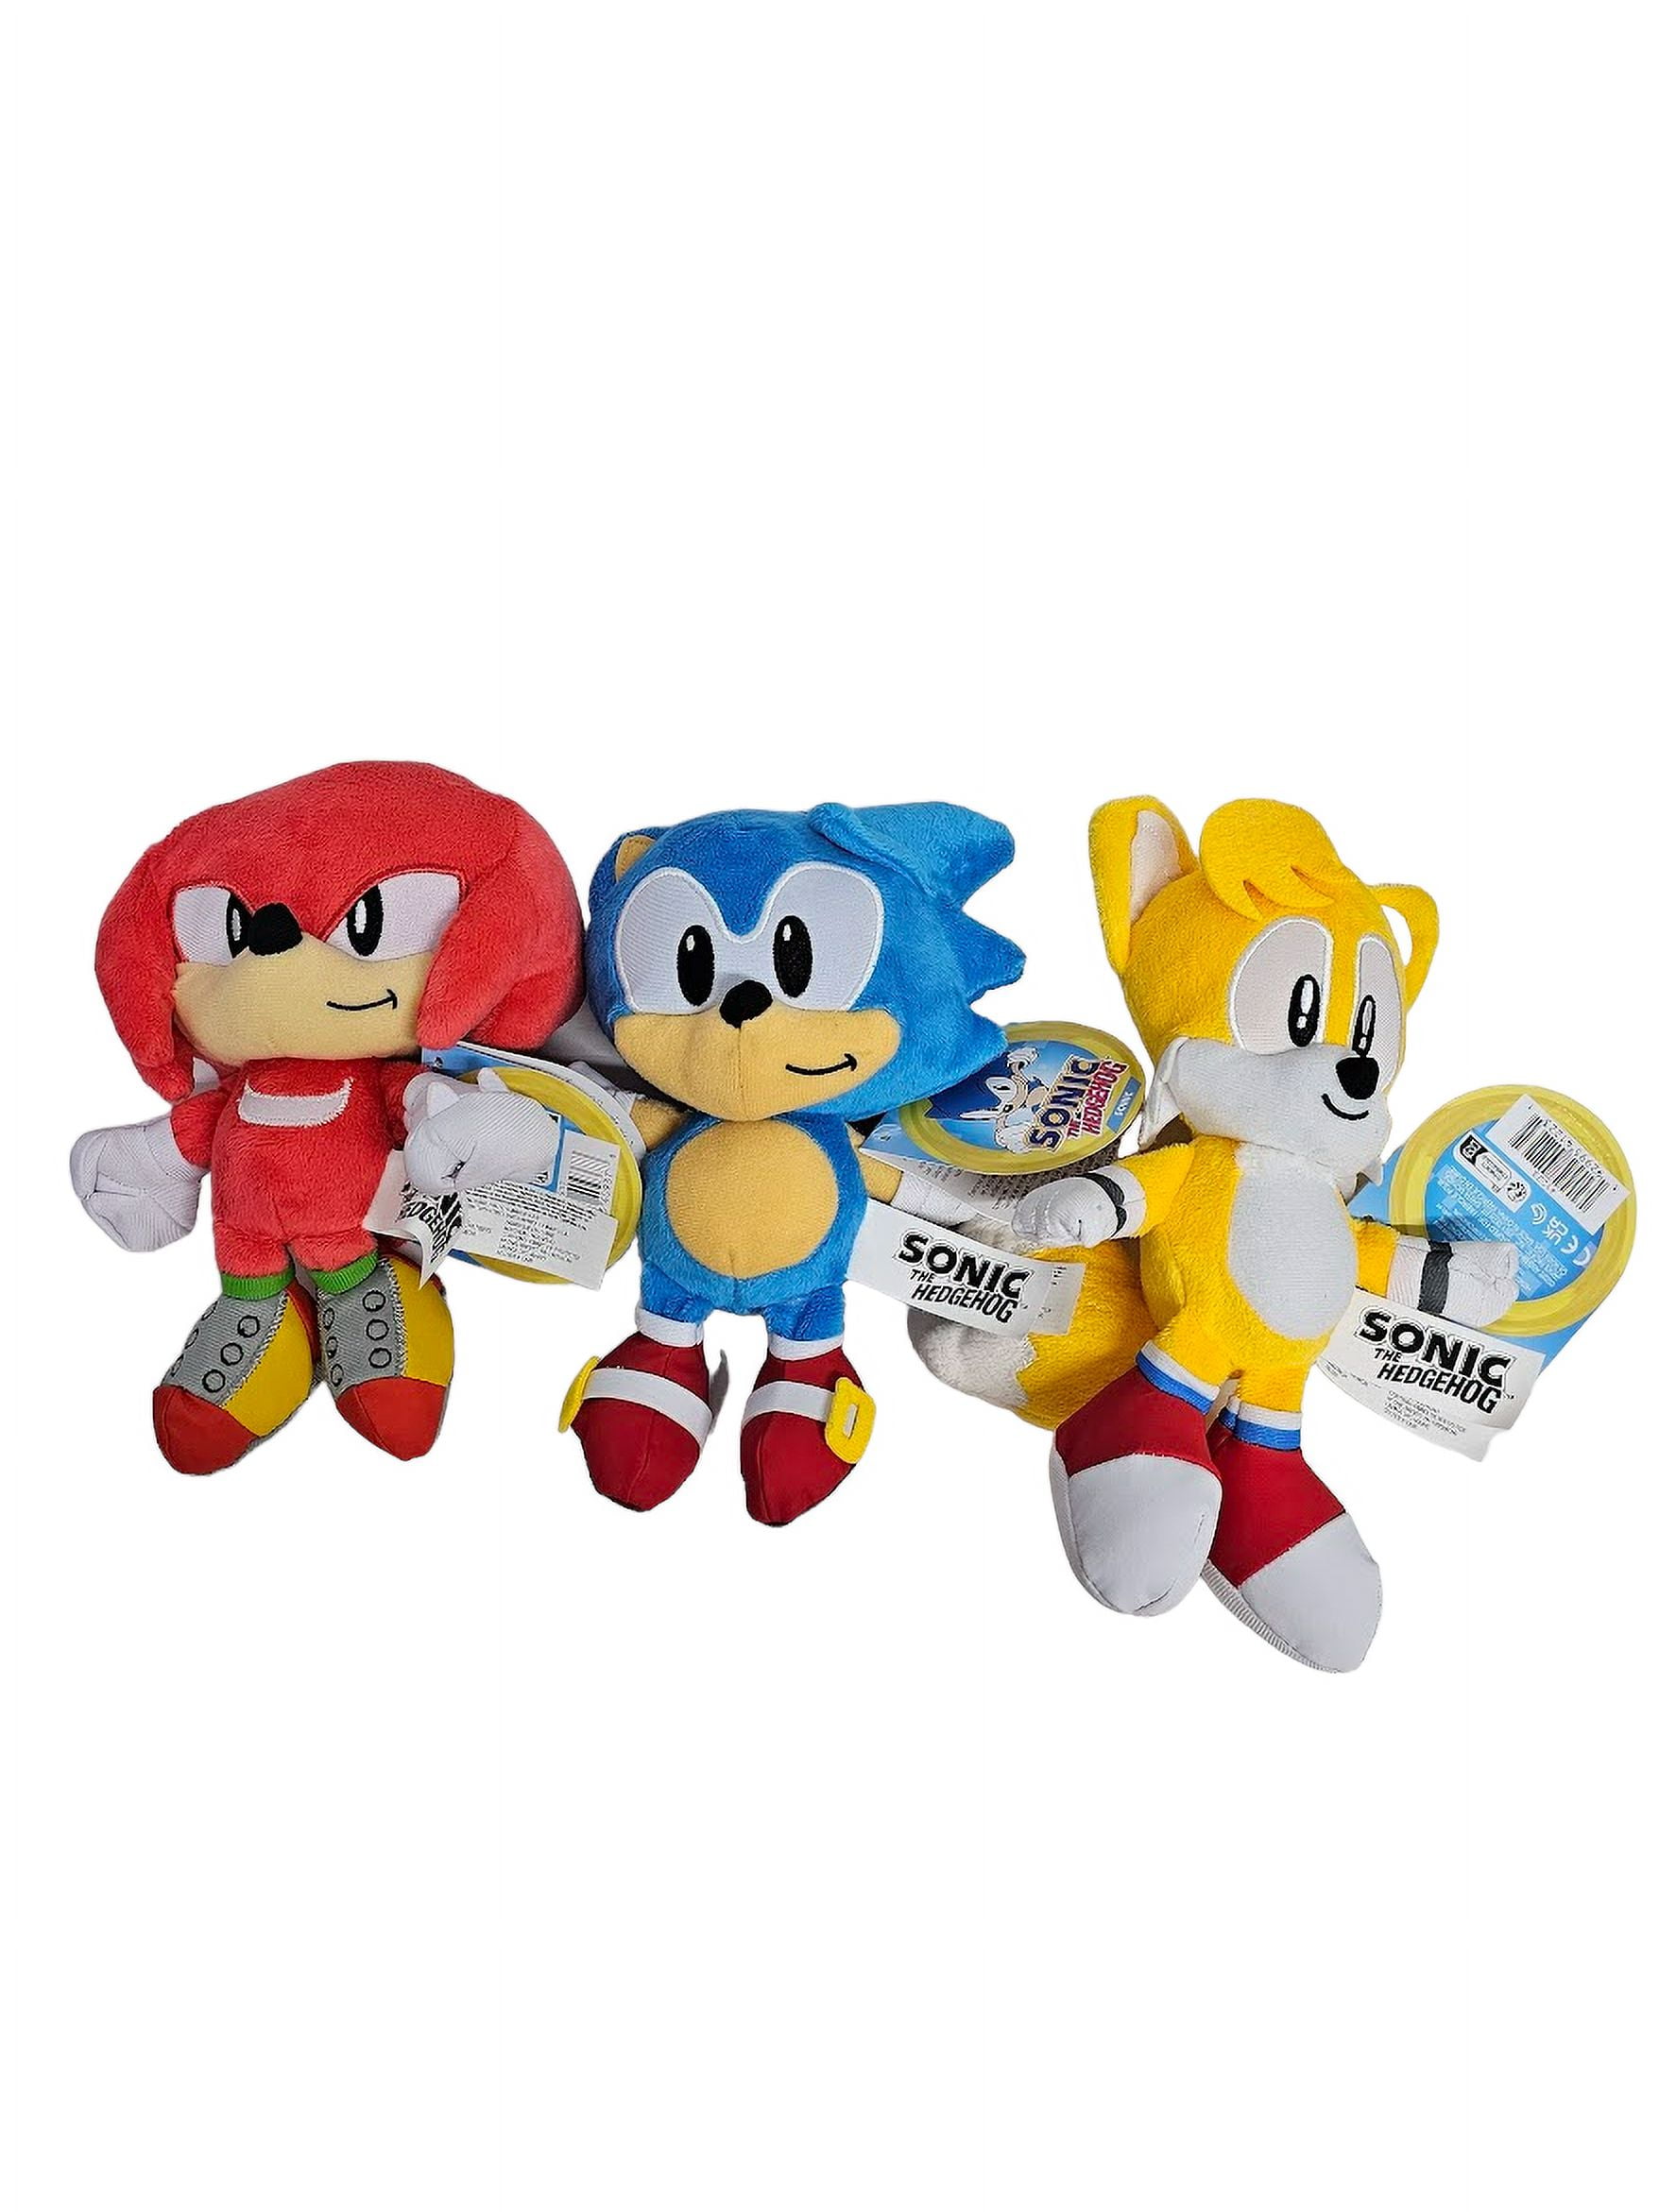 28cm Sonic The Hedgehog Tails Knuckles Plush Toys Stuffed Animals Gift For  Kids From Security11, $3.72